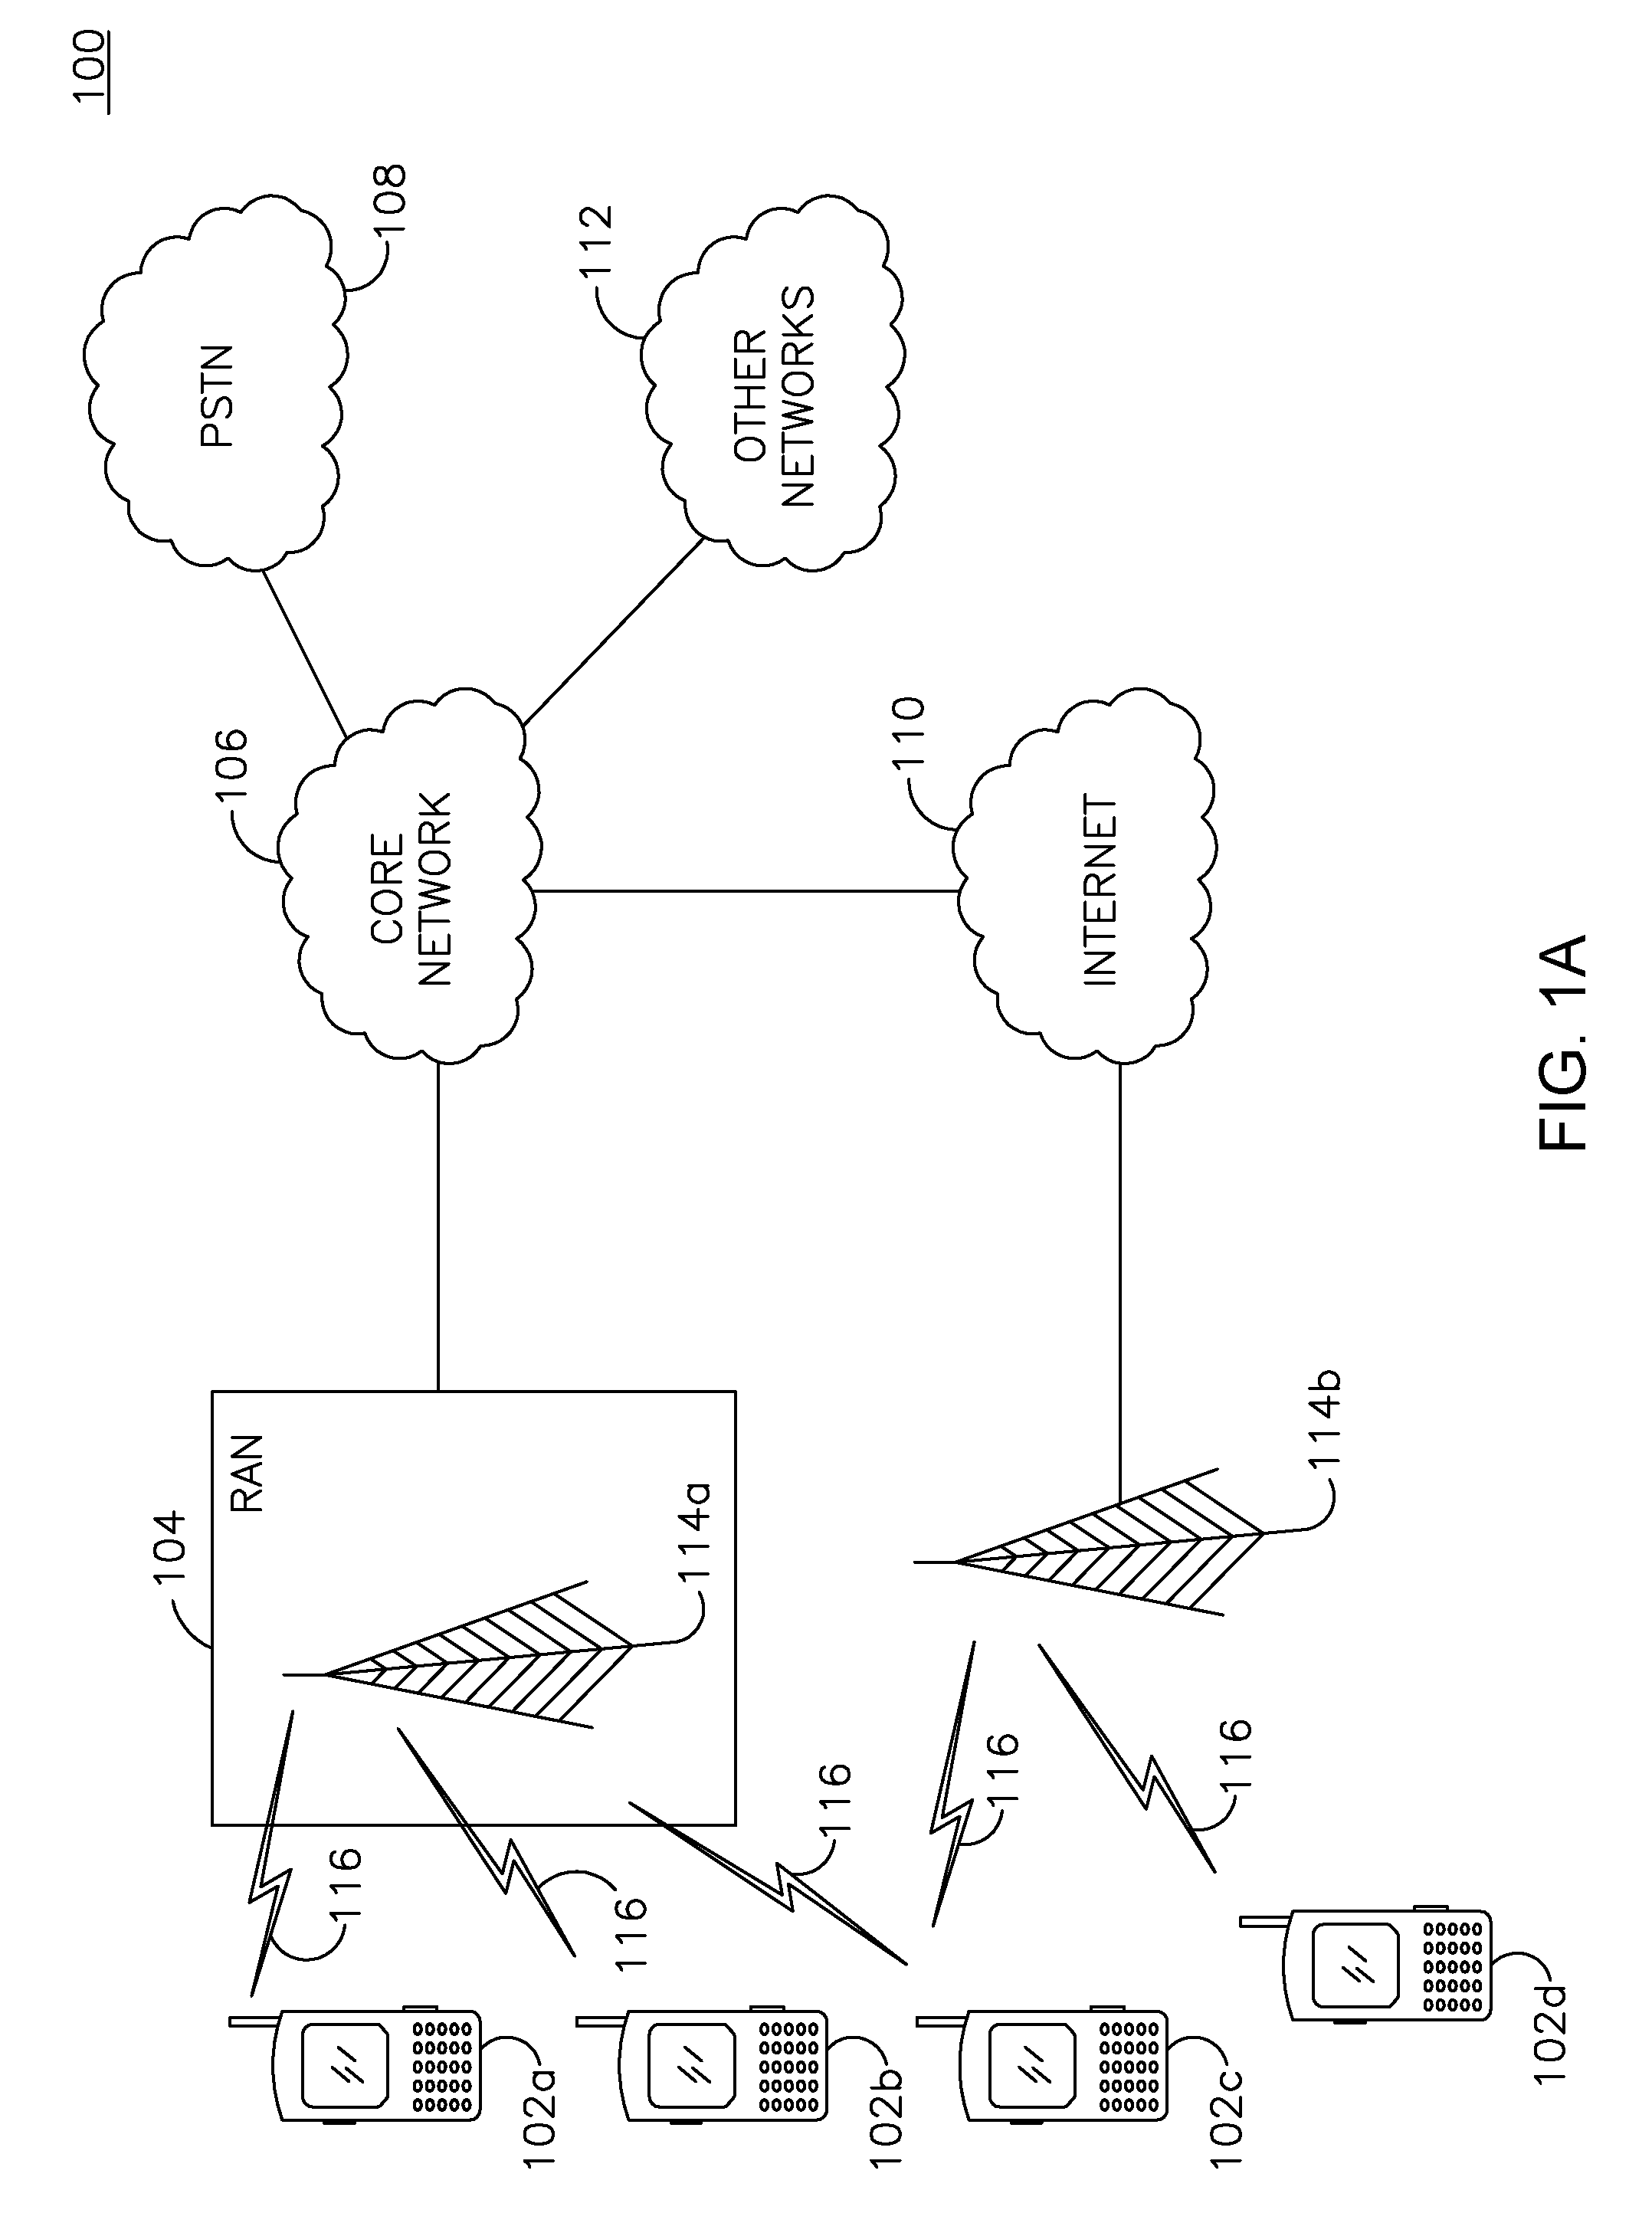 Method and apparatus for dynamic bandwidth provisioning in frequency division duplex systems